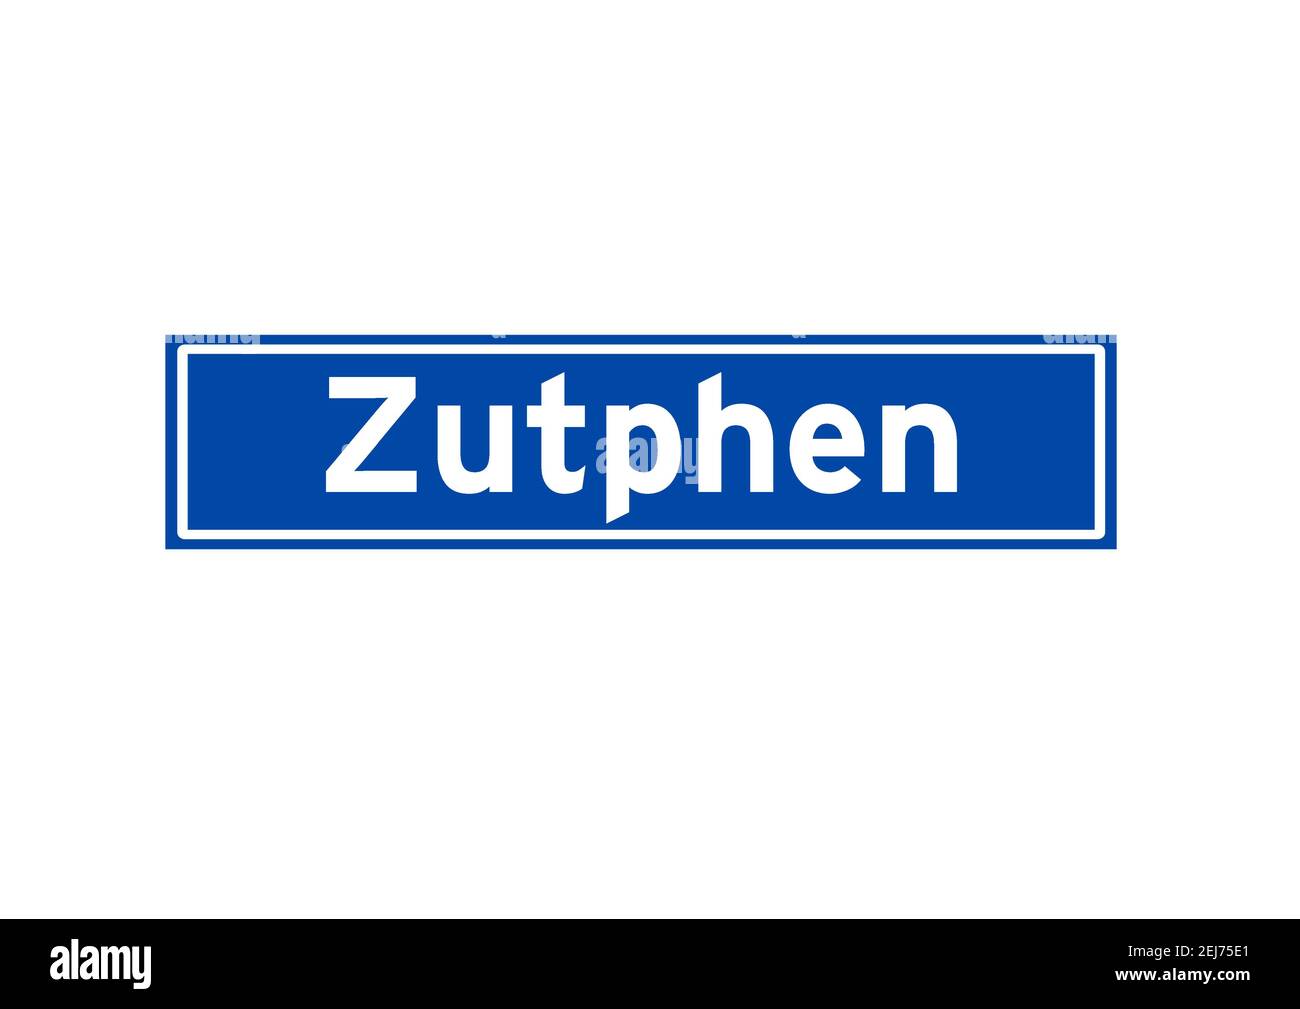 Zutphen isolated Dutch place name sign. City sign from the Netherlands. Stock Photo